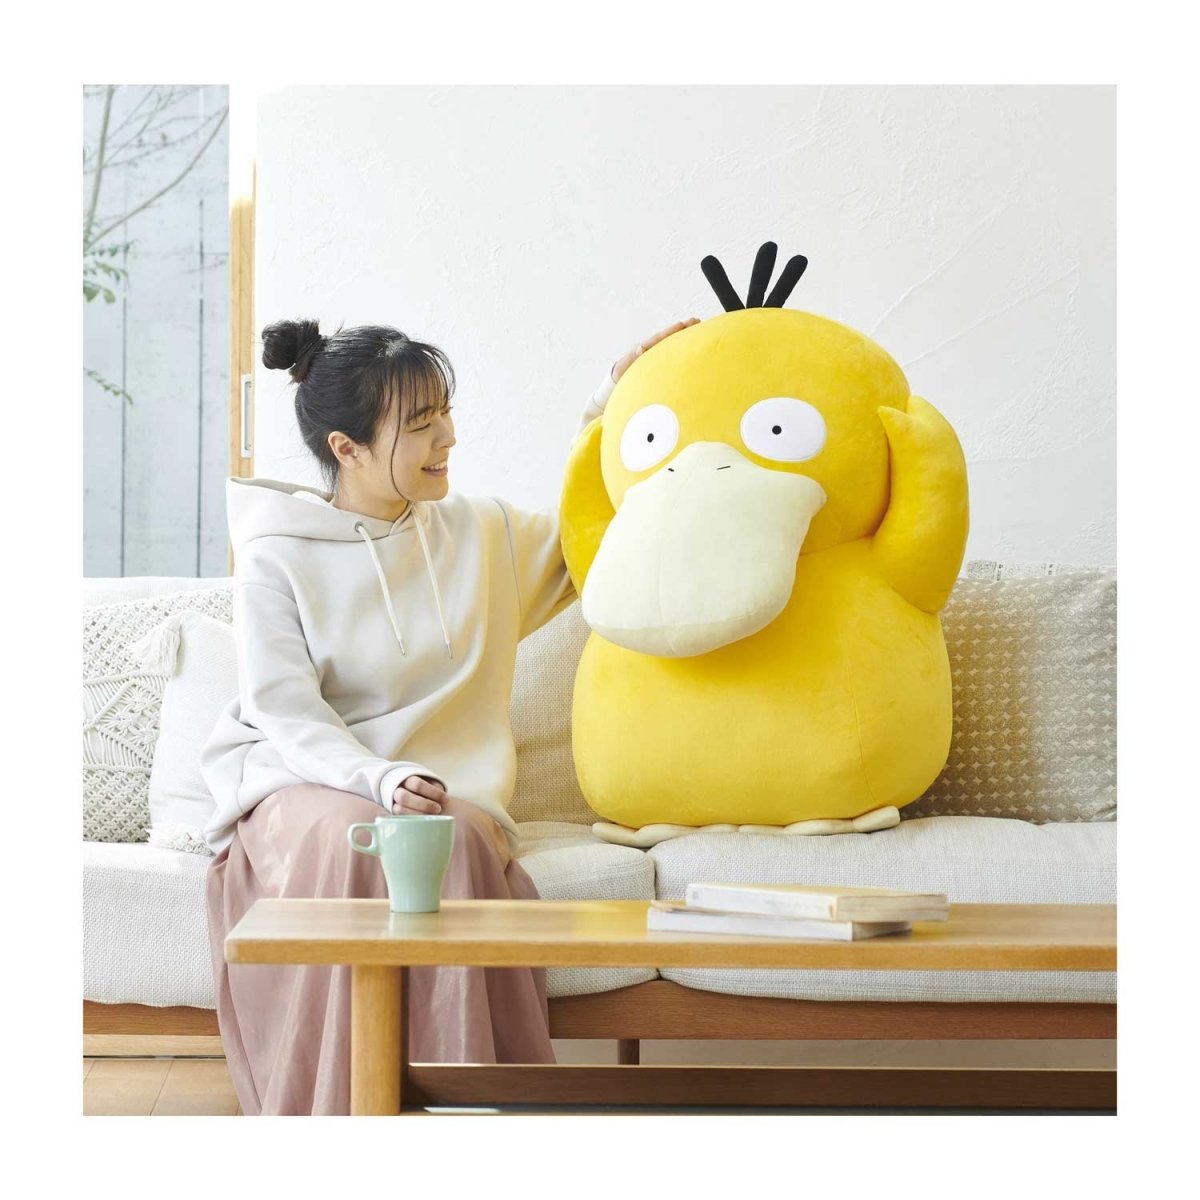 A woman sitting on a couch next to a life-sized Psyduck plush toy. She’s rubbing it’s big yellow head as it gazes into the distance.